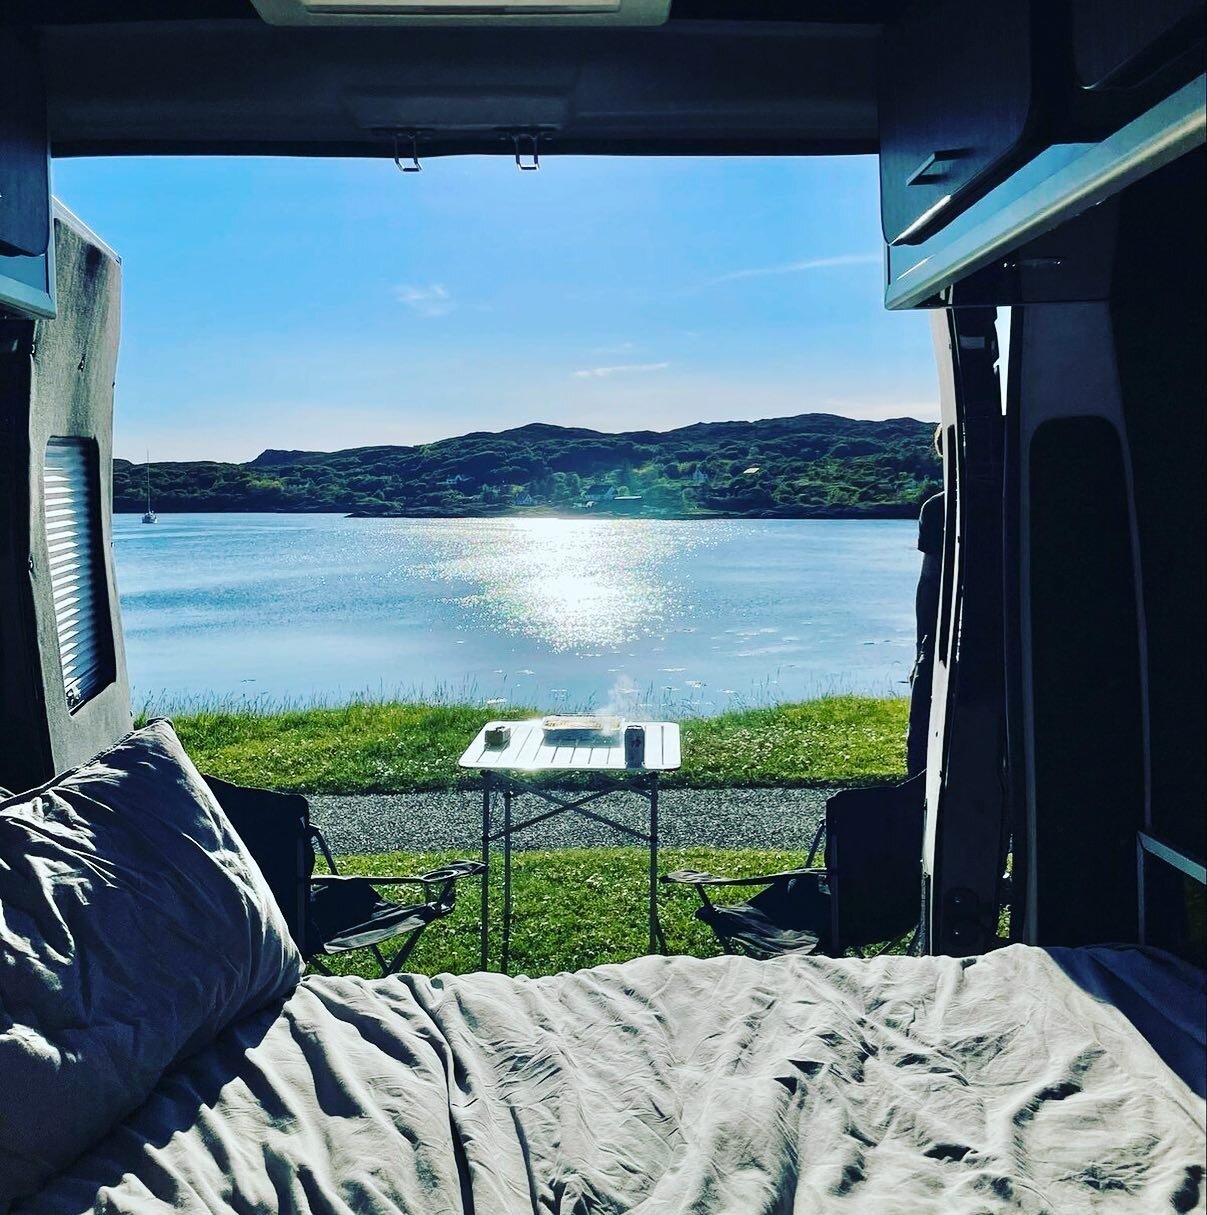 🚍☀️ Room with a view ☀️🚍 Get off the beaten track with #stormcampervans 🌊#staycationuk #scotland #lakedistrict #campervan #nc500